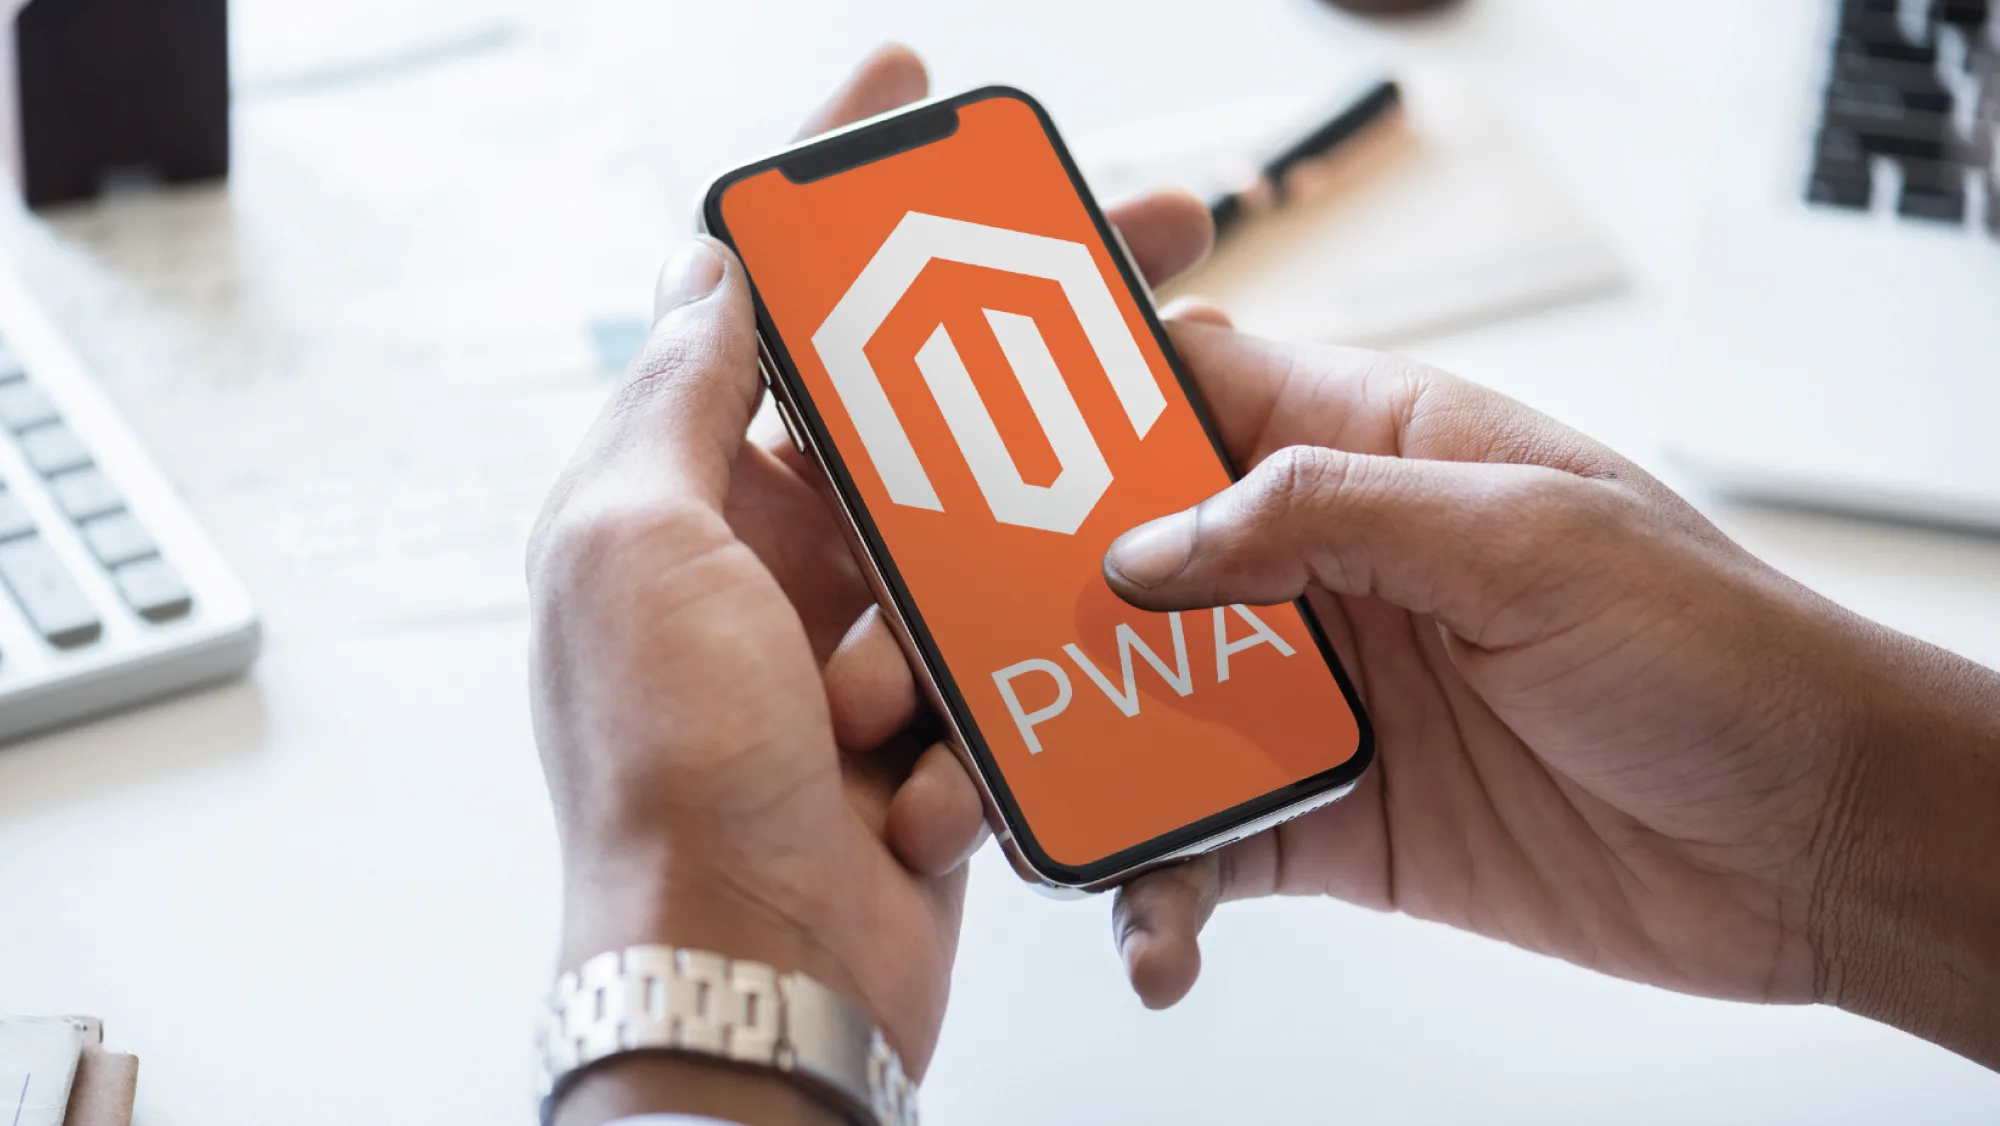 A person holding a mobile phone with big Magento logo and PWA text written bellow.